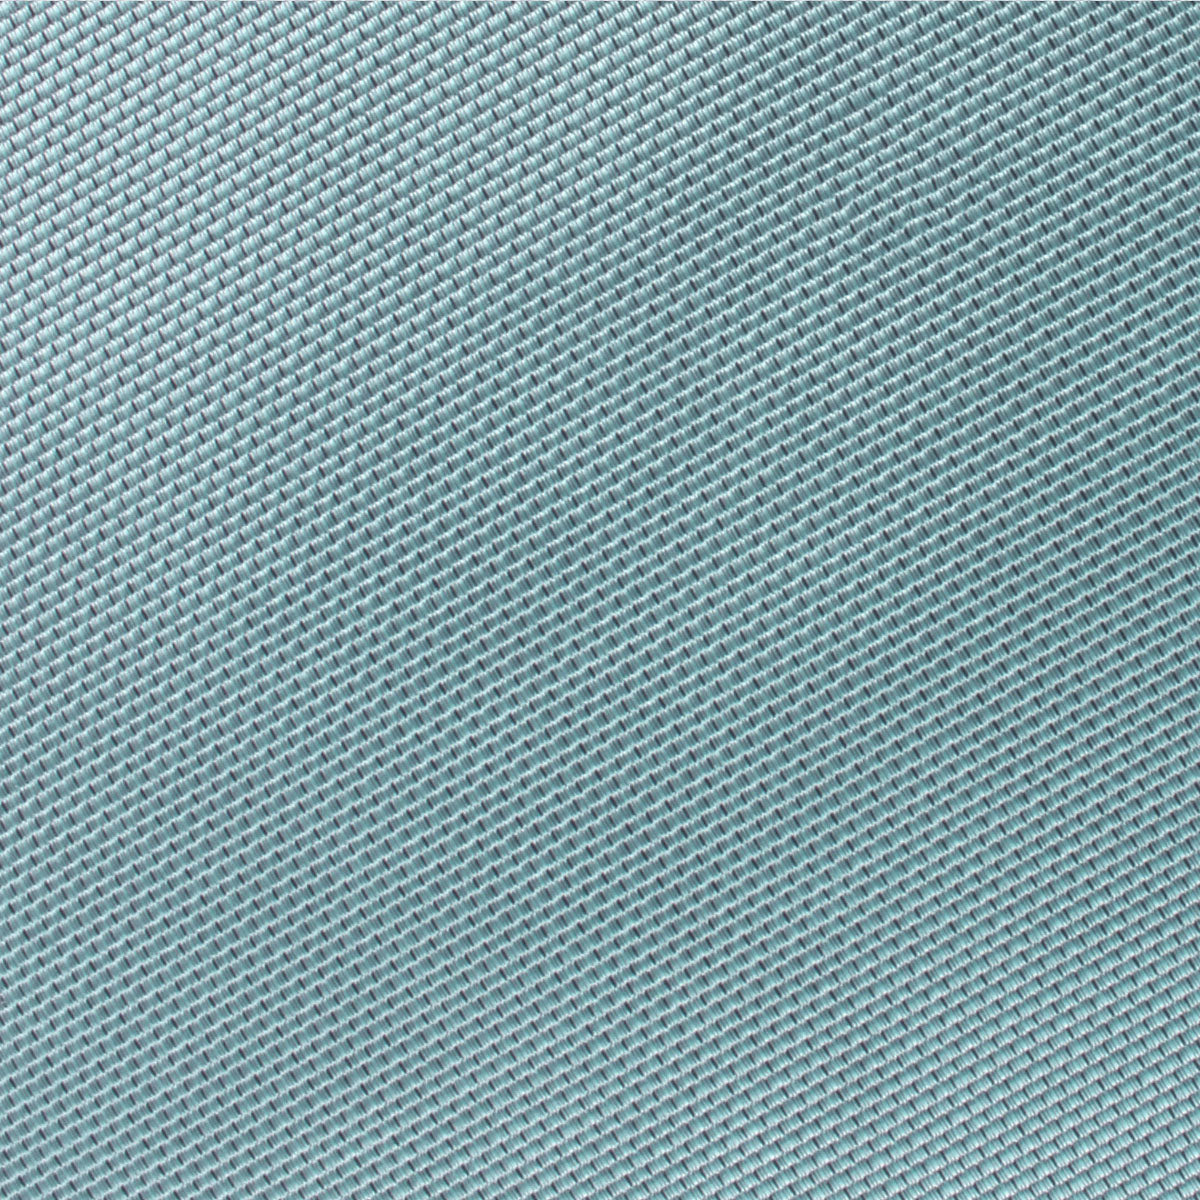 Turkish Teal Blue Weave Kids Bow Tie Fabric